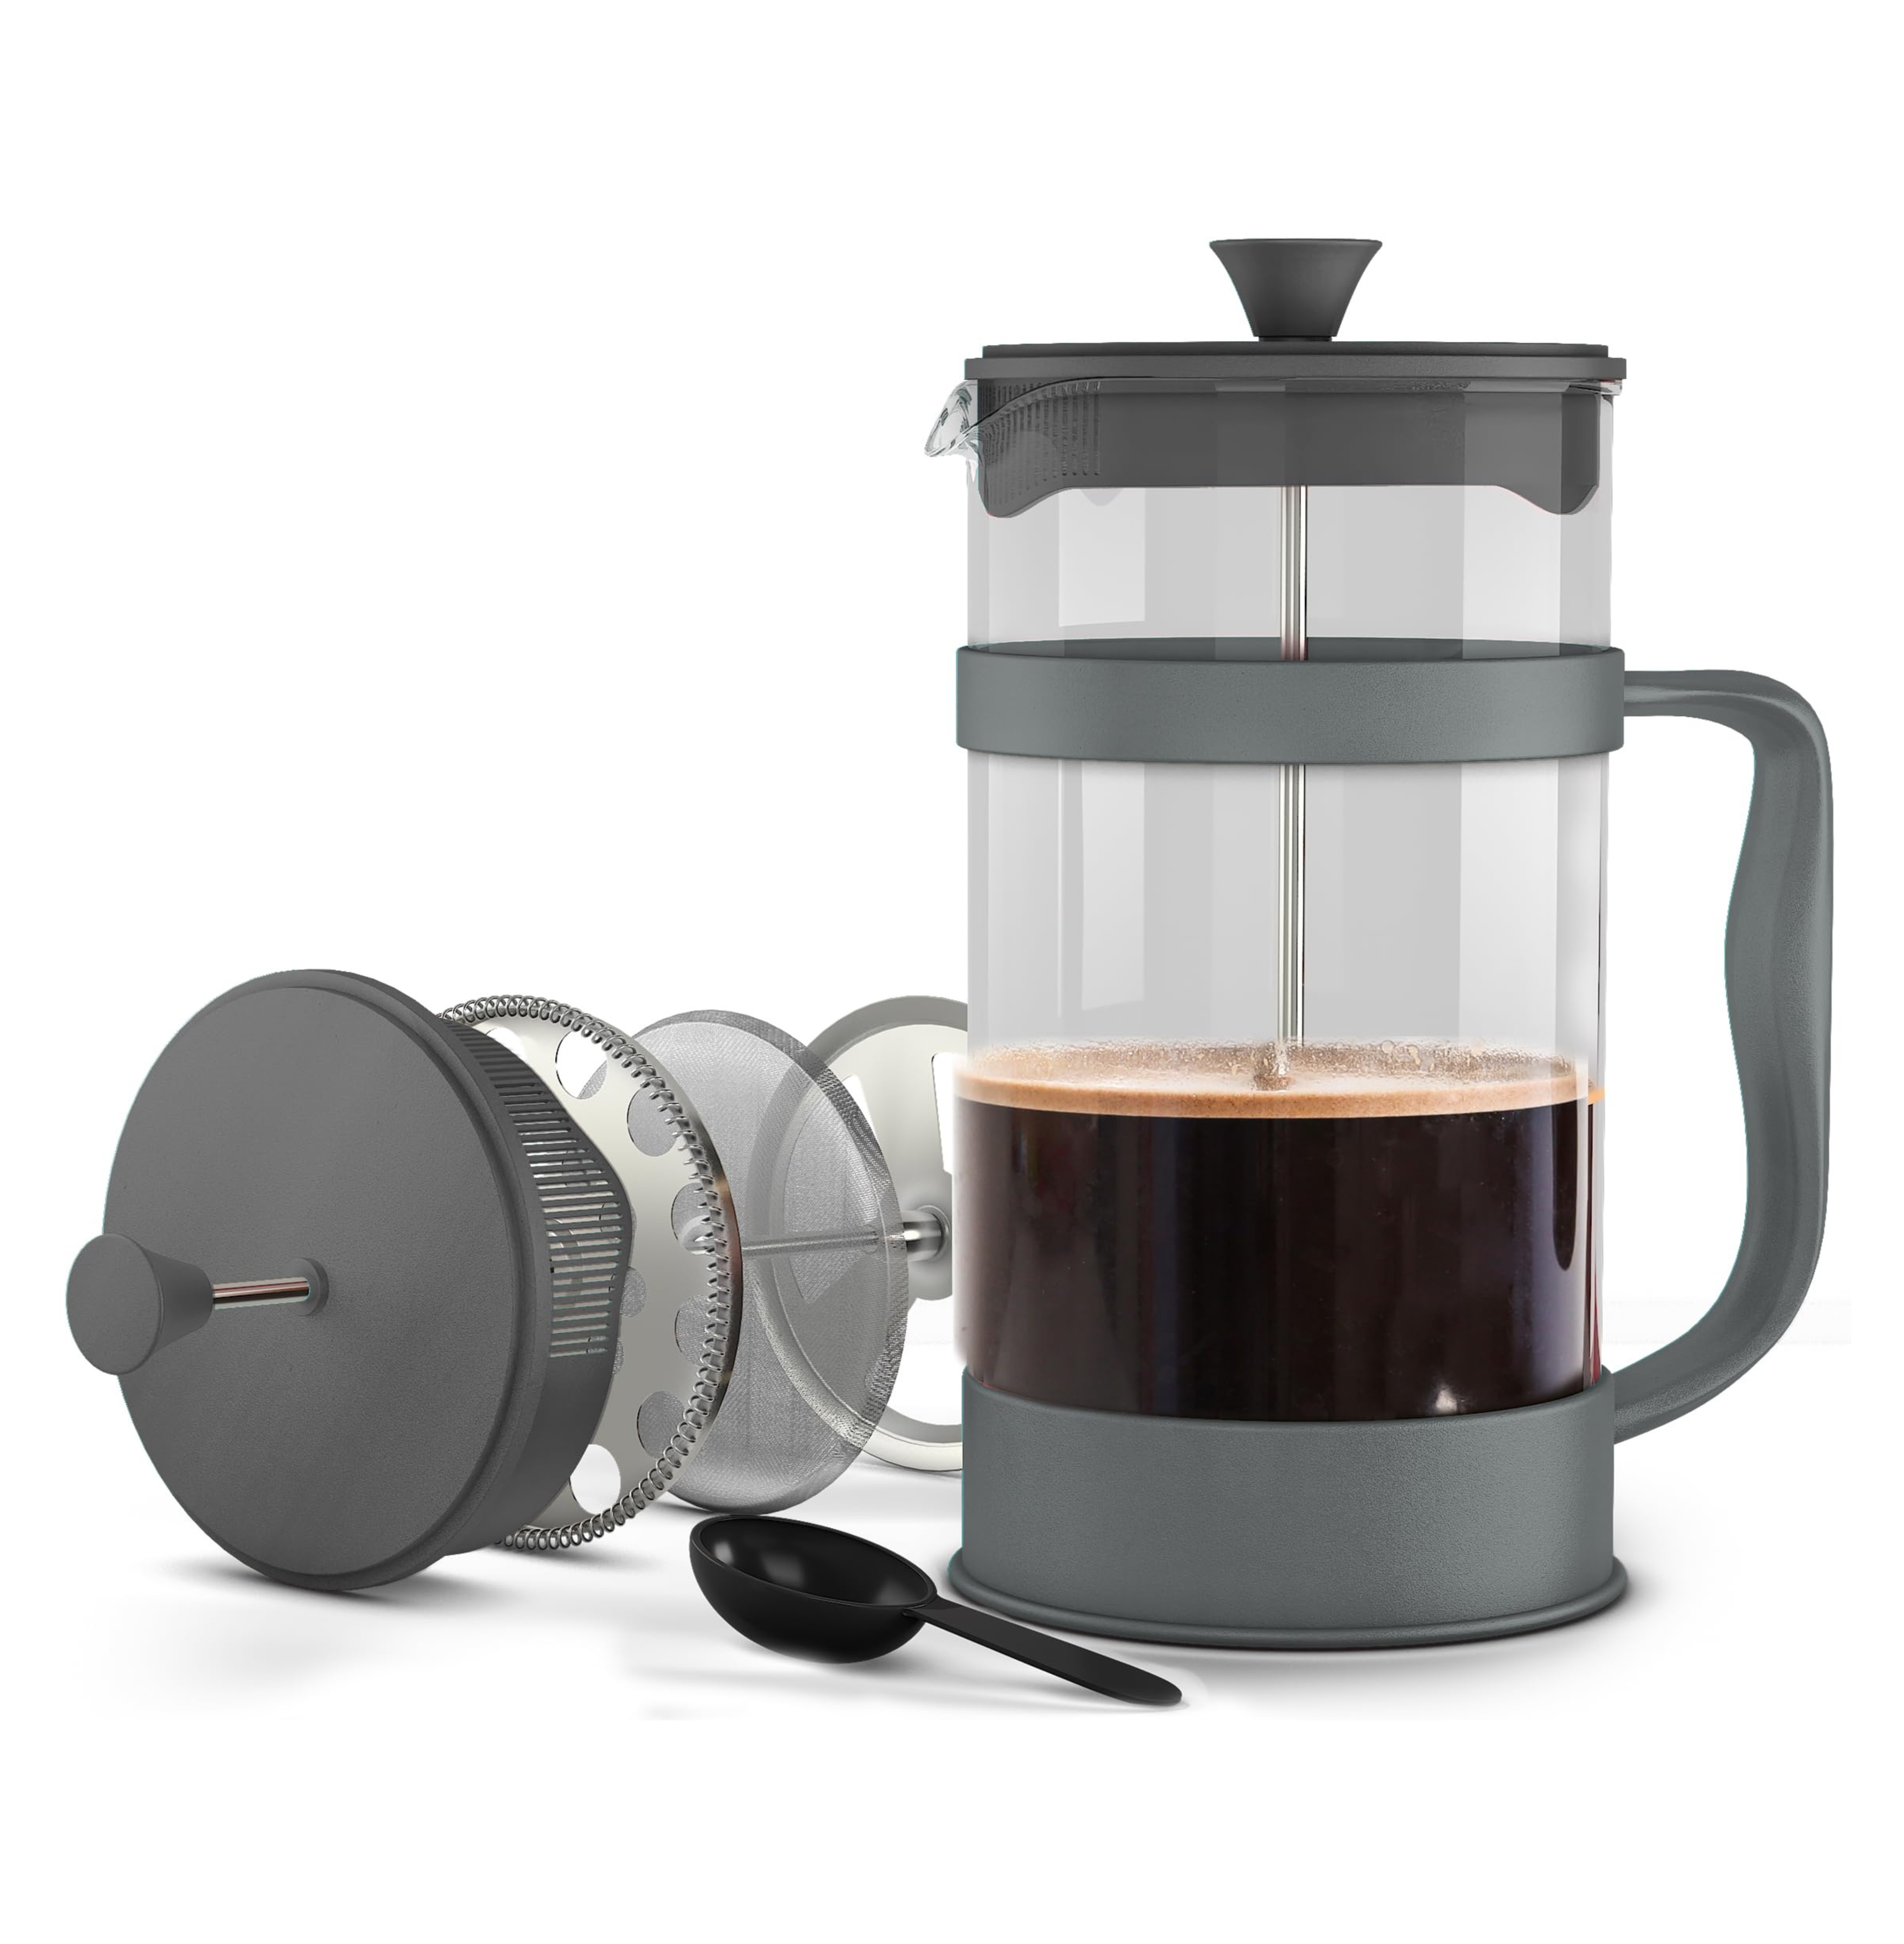 Utopia Kitchen - French Press Espresso - Tea and coffee Maker with Triple Filters 12 Ounce, 12 milliliters Stainless Steel Plunger and Heat Resistant Borosilicate Glass - Grey